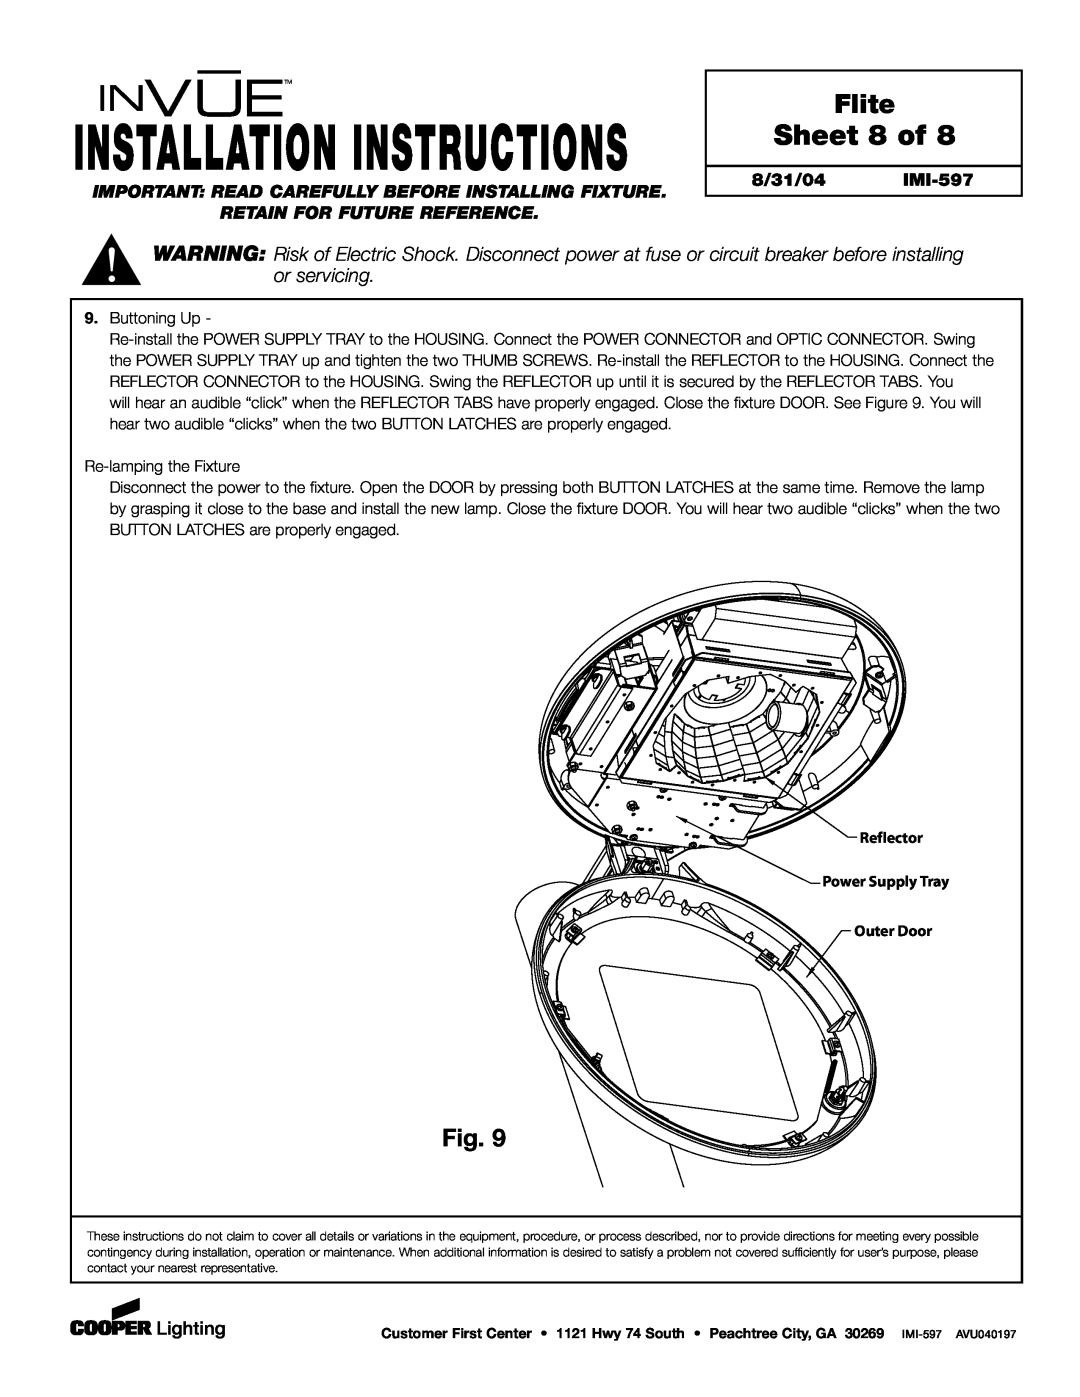 Cooper Lighting Sheet 8 of, Installation Instructions, Flite, Retain For Future Reference, 8/31/04 IMI-597 